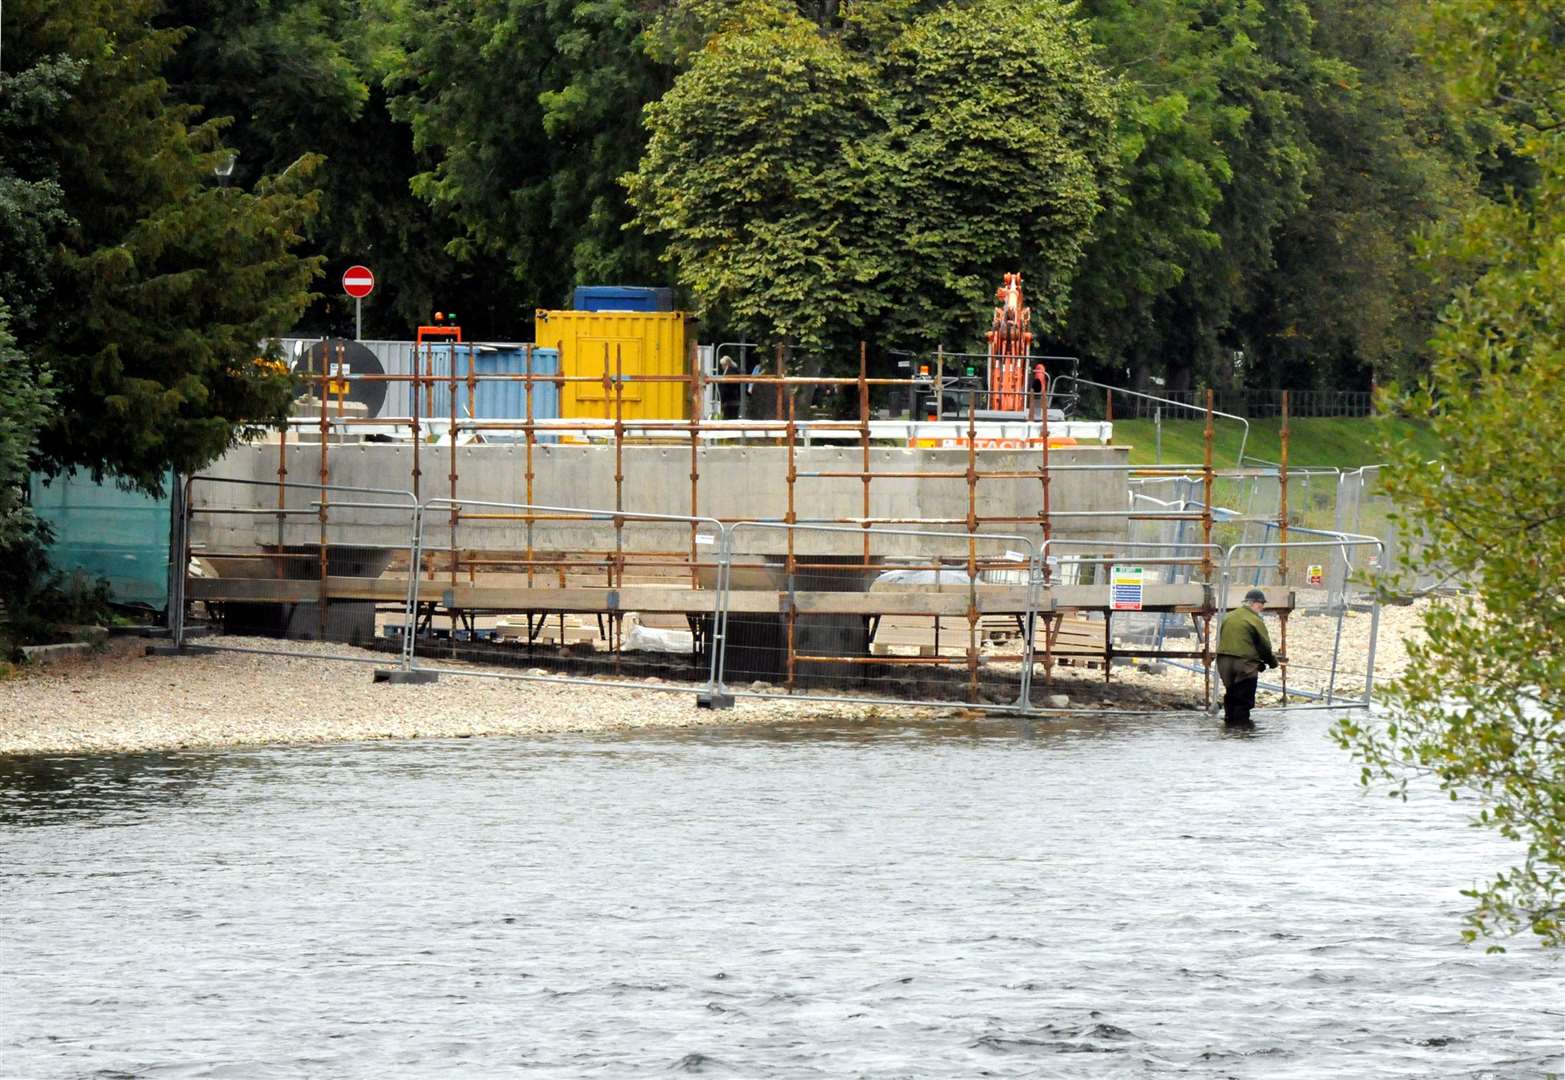 Supply shortages have led to "slight" delays in completing the structure by the River Ness.